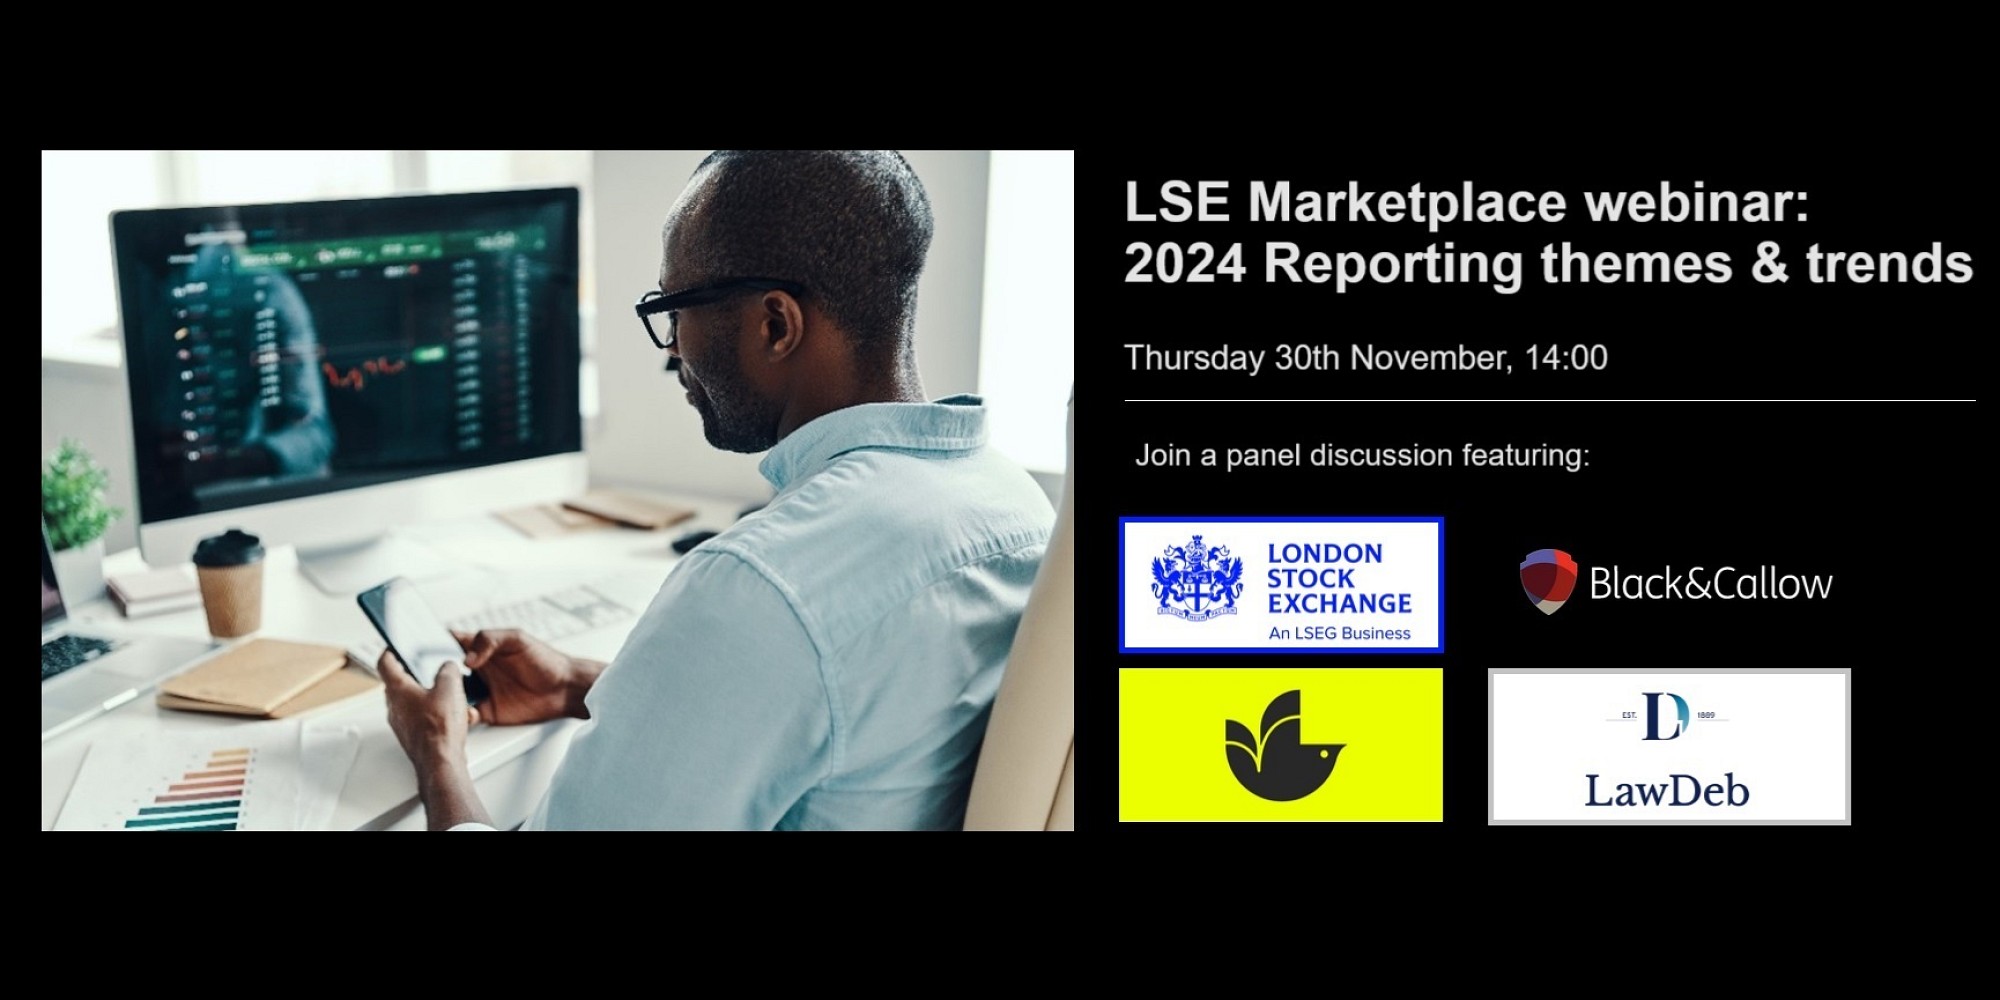 2024 Reporting themes & trends: join the LSE webinar on Thurs 30th November with LawDeb, Atticus & B&C